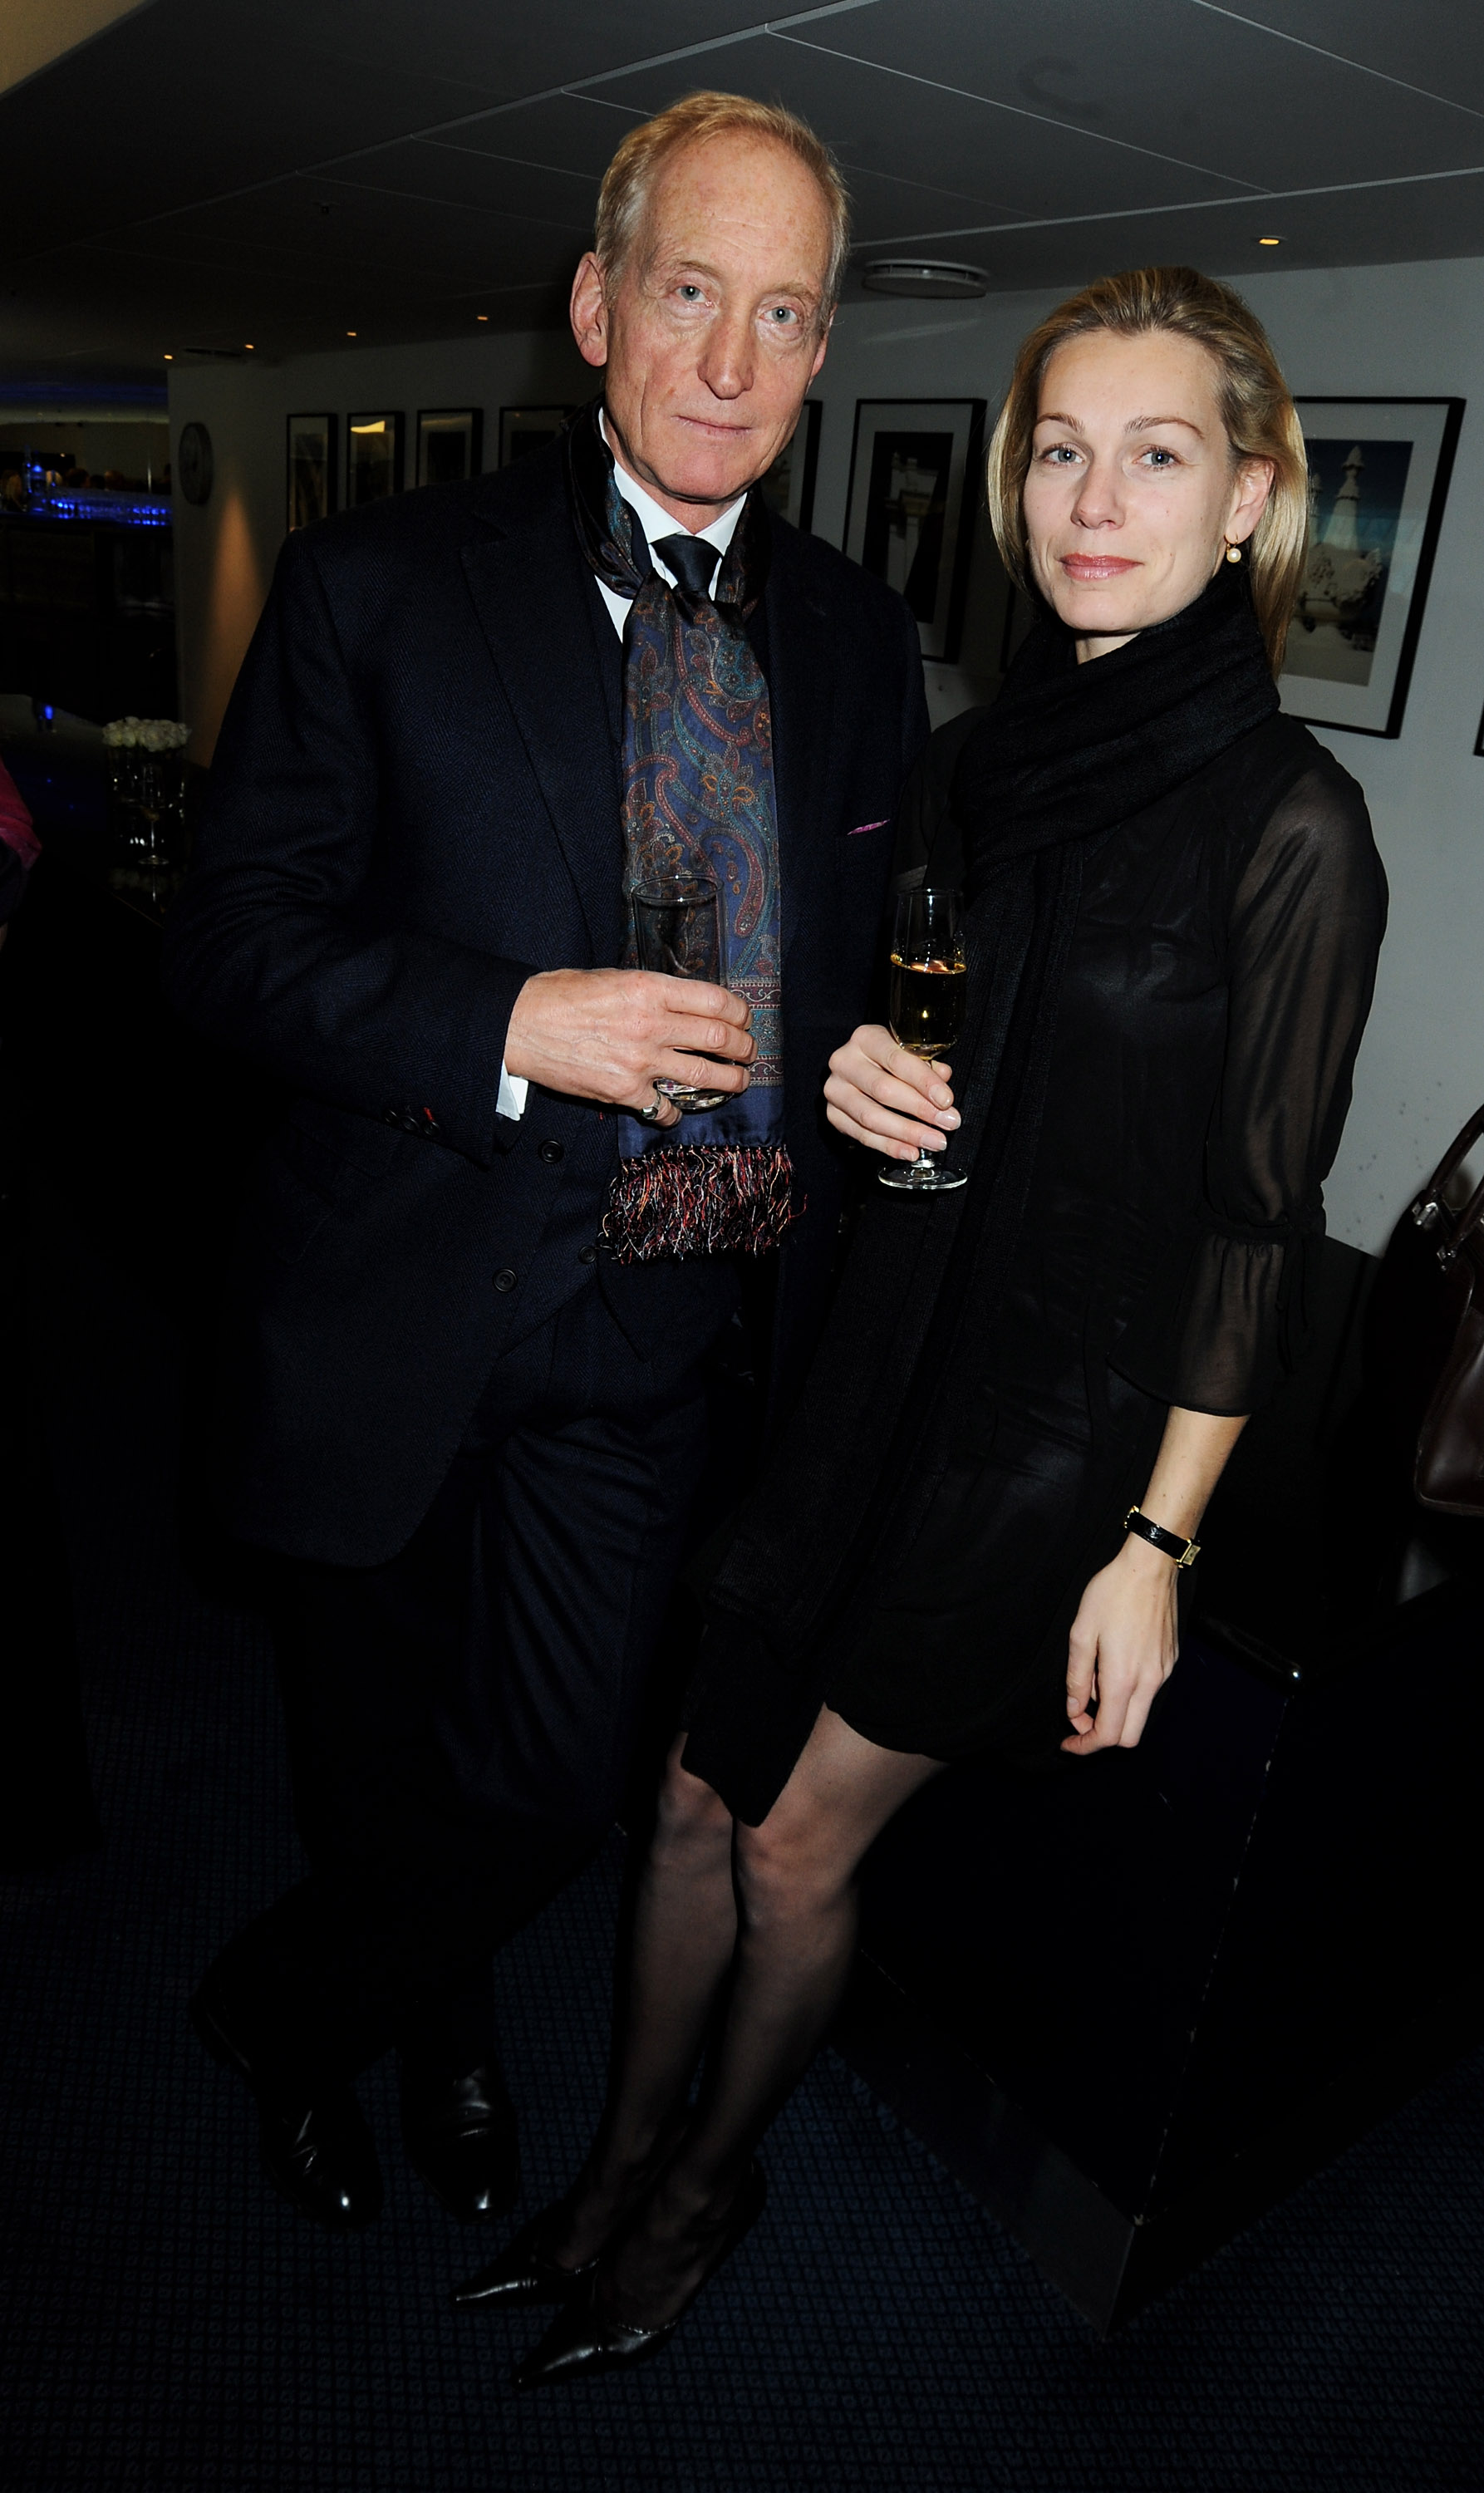 Charles Dance and Eleanor Boorman at the Royal Opera House on November 24, 2008, in London, England. | Source: Getty Images